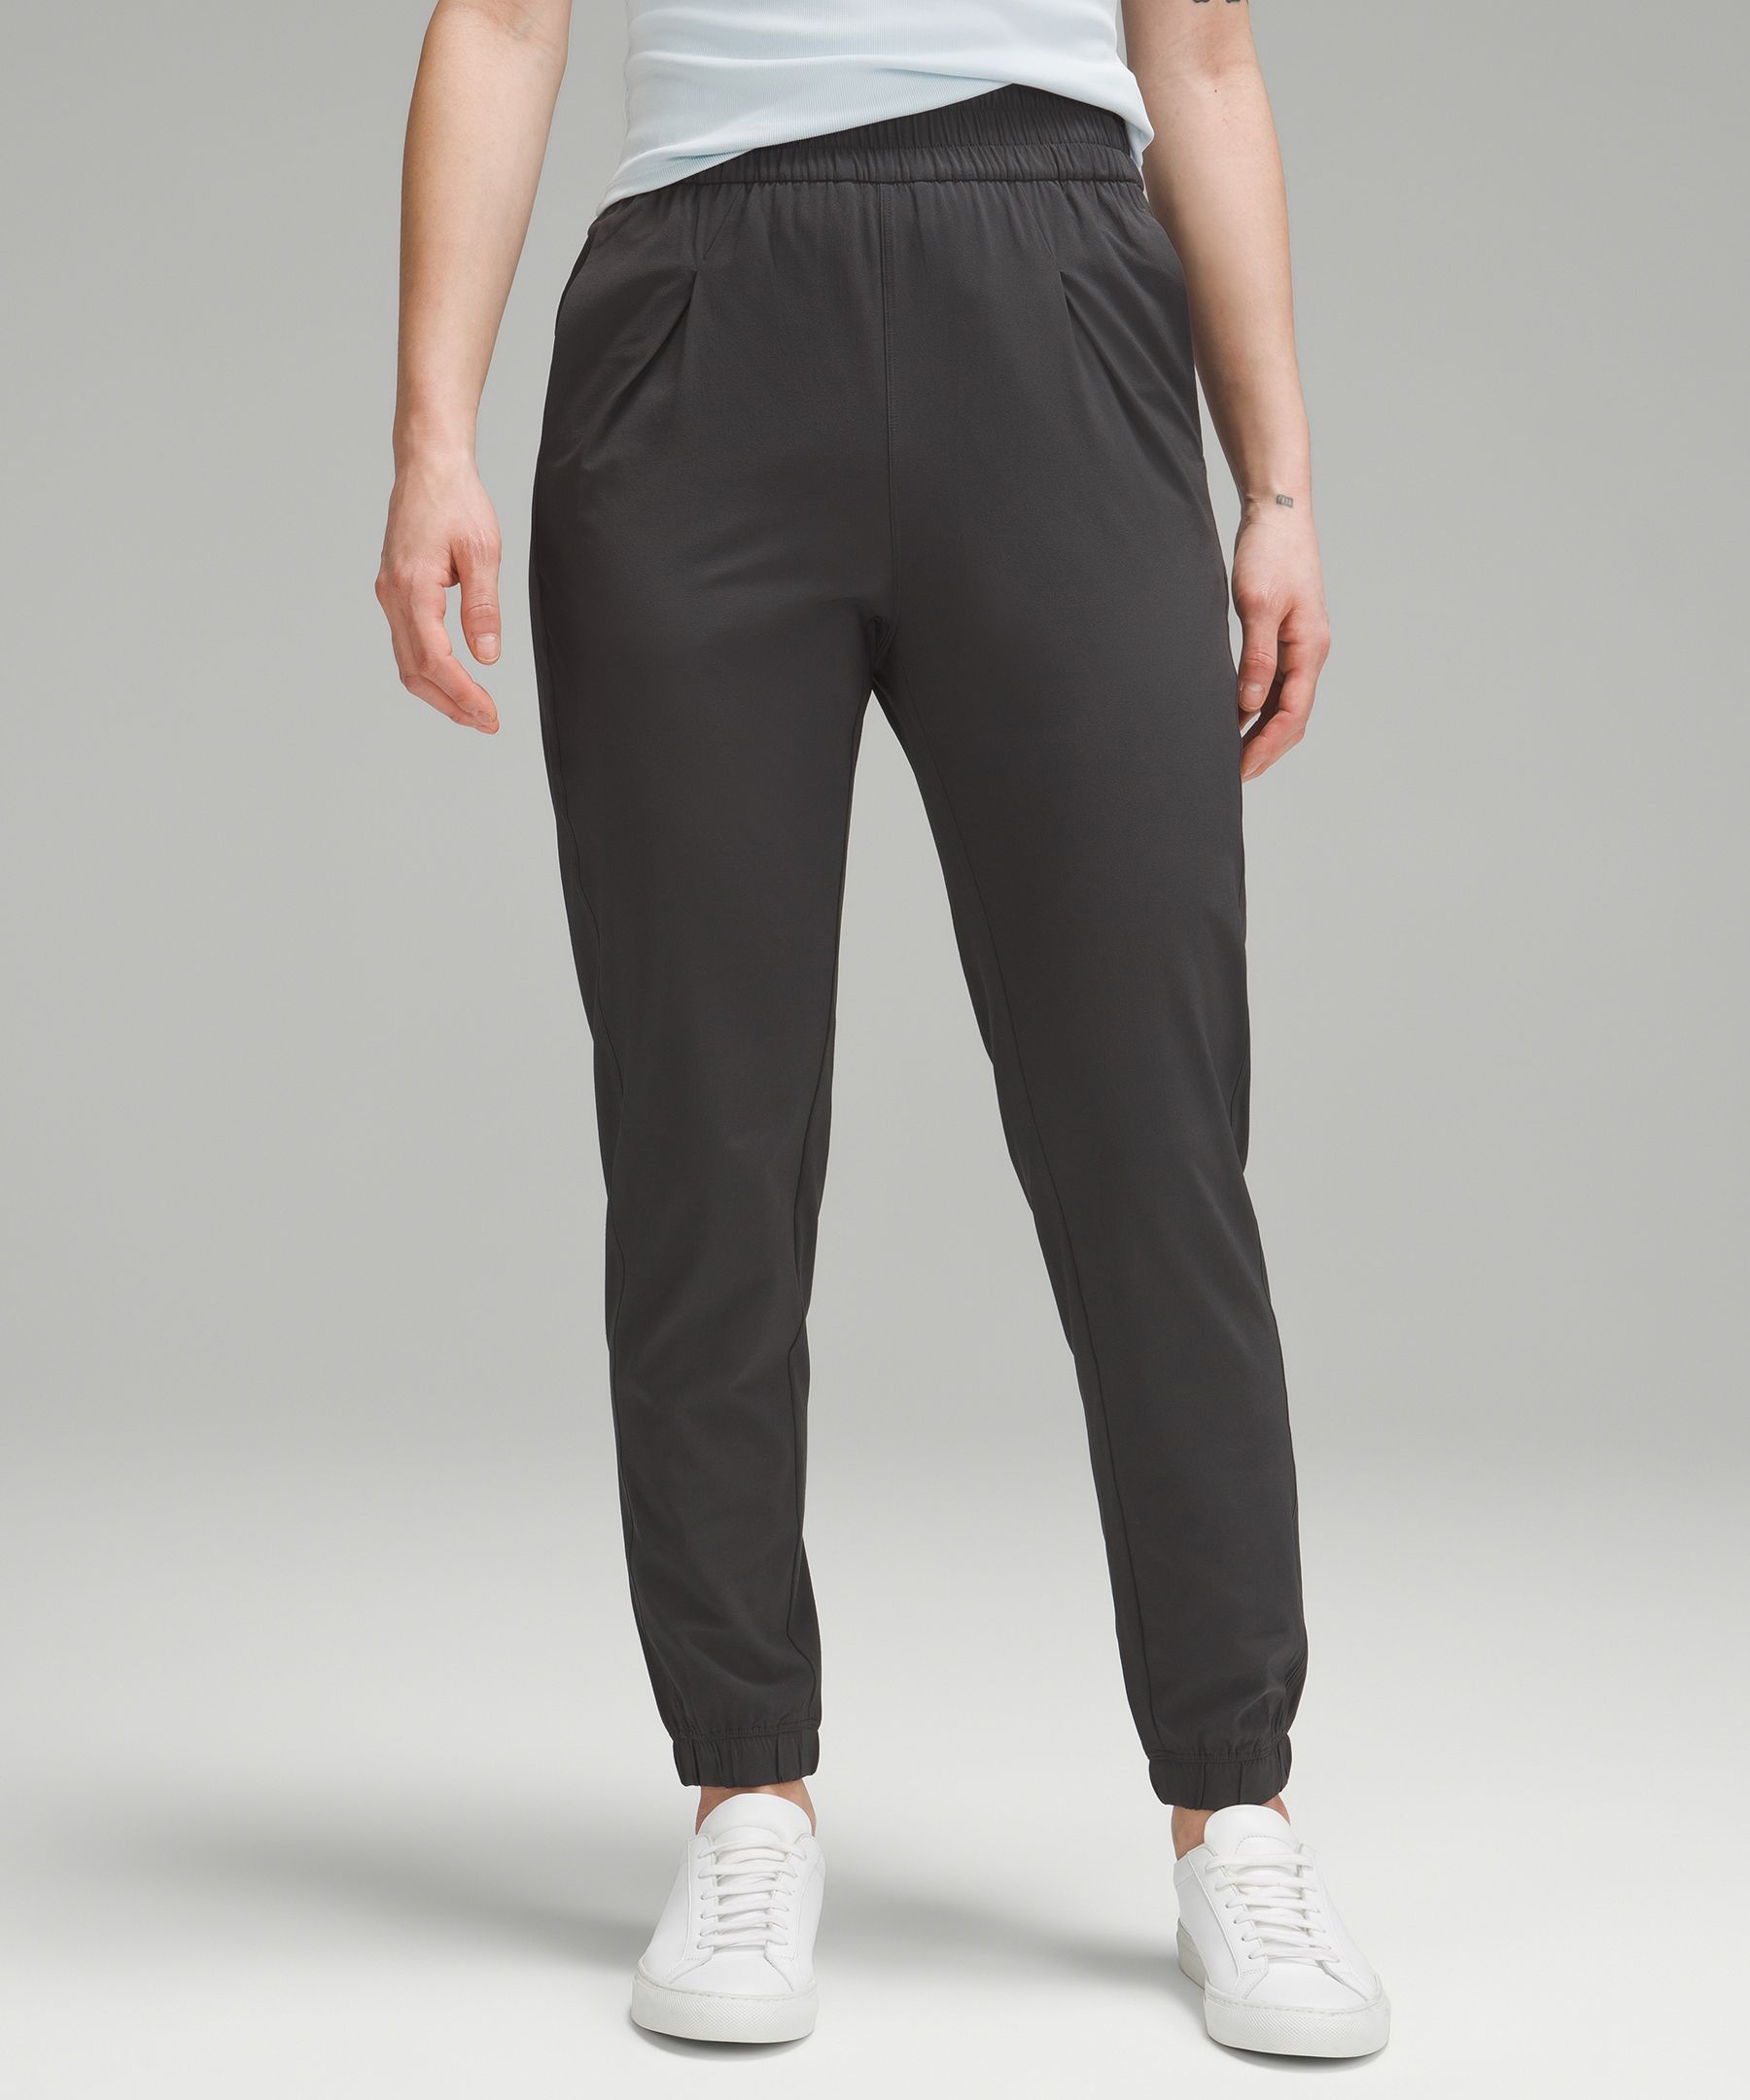 Ease Back In High-Rise Pants *Asia Fit